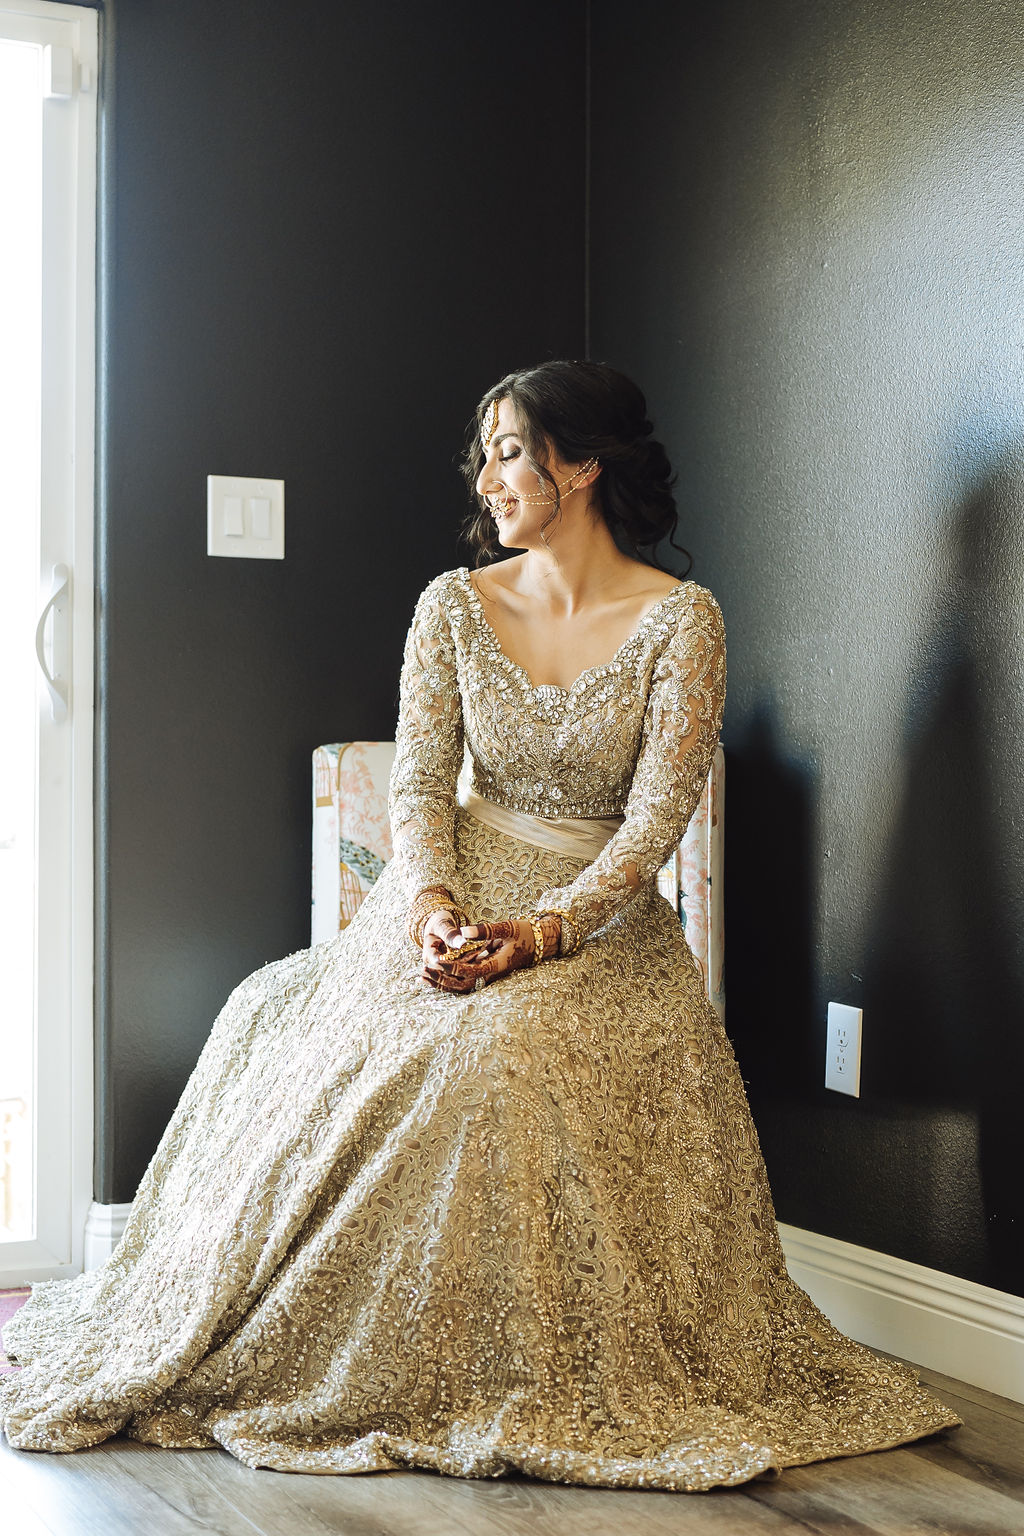 bride wearing embellished golden wedding saree, jewelry and henna sits in chair 